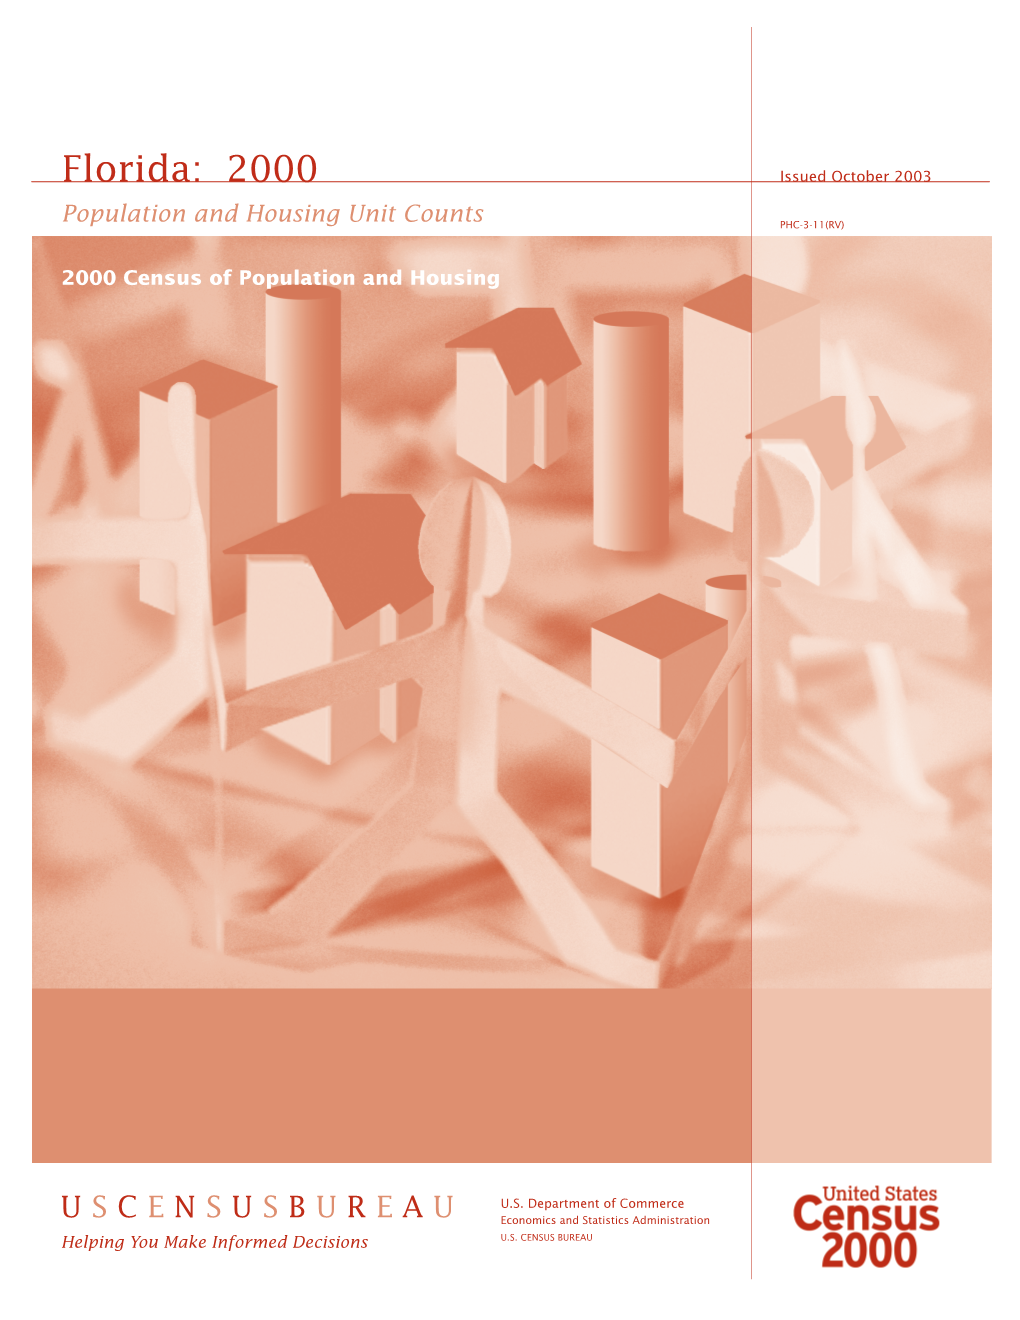 Population and Housing Unit Counts, Florida: 2000